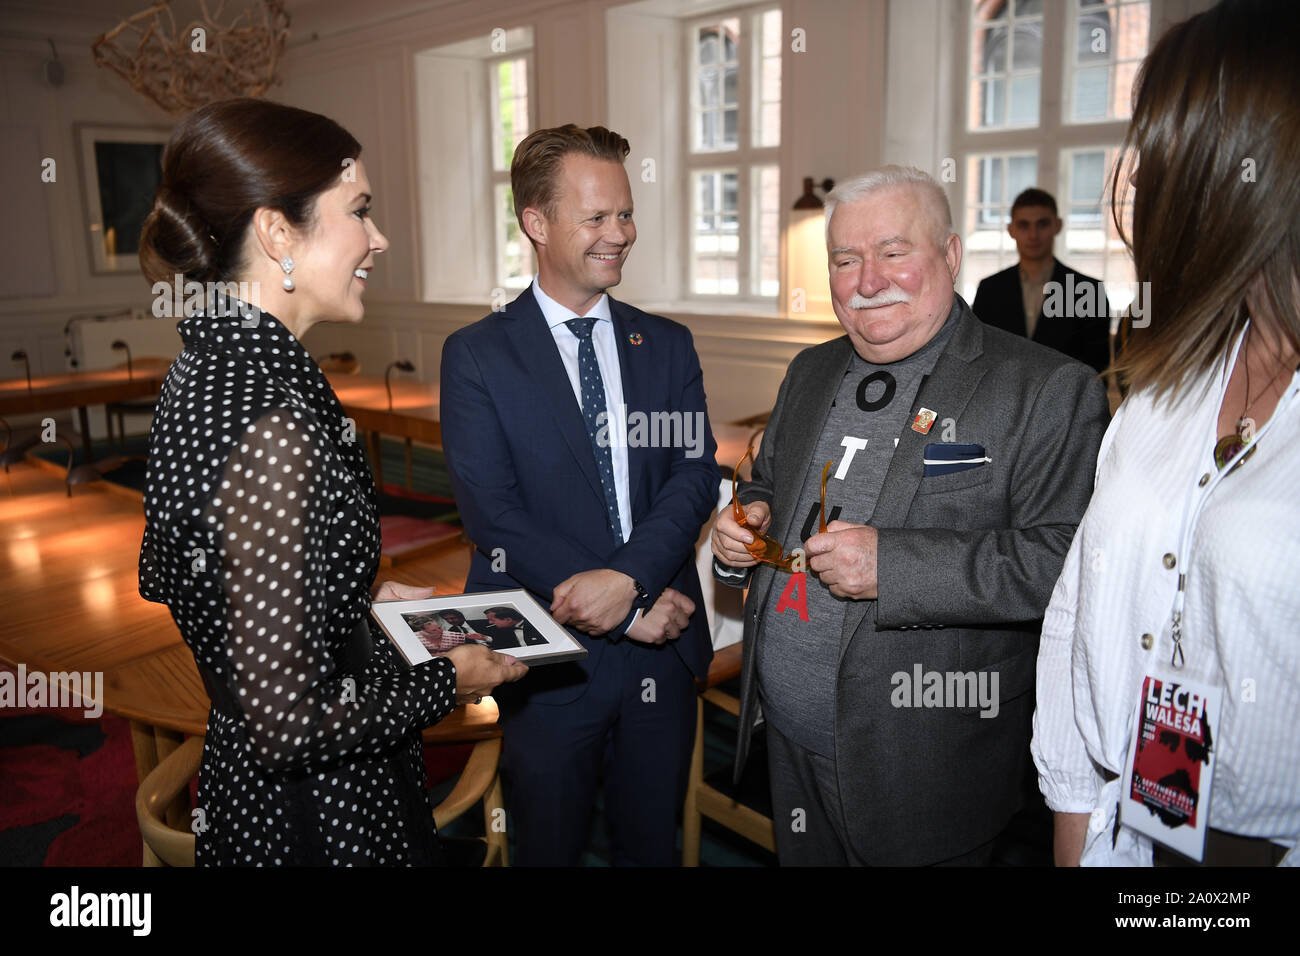 KÃ¸Benhavn, Danmark. 6th Sep, 2019. Lech Walesa, former President in Poland and founder og the free Polish union SolidarnoÅ›Ä‡ is meeting with Jeppe Kofoed, present Minister of Foreign Affaires in Denmark and H.R.H. Crown Princess Mary at the University of Copenhagen after Lech Walesas has delivered his speech.Foto: Lars Moeller Credit: Lars Moeller/ZUMA Wire/Alamy Live News Stock Photo